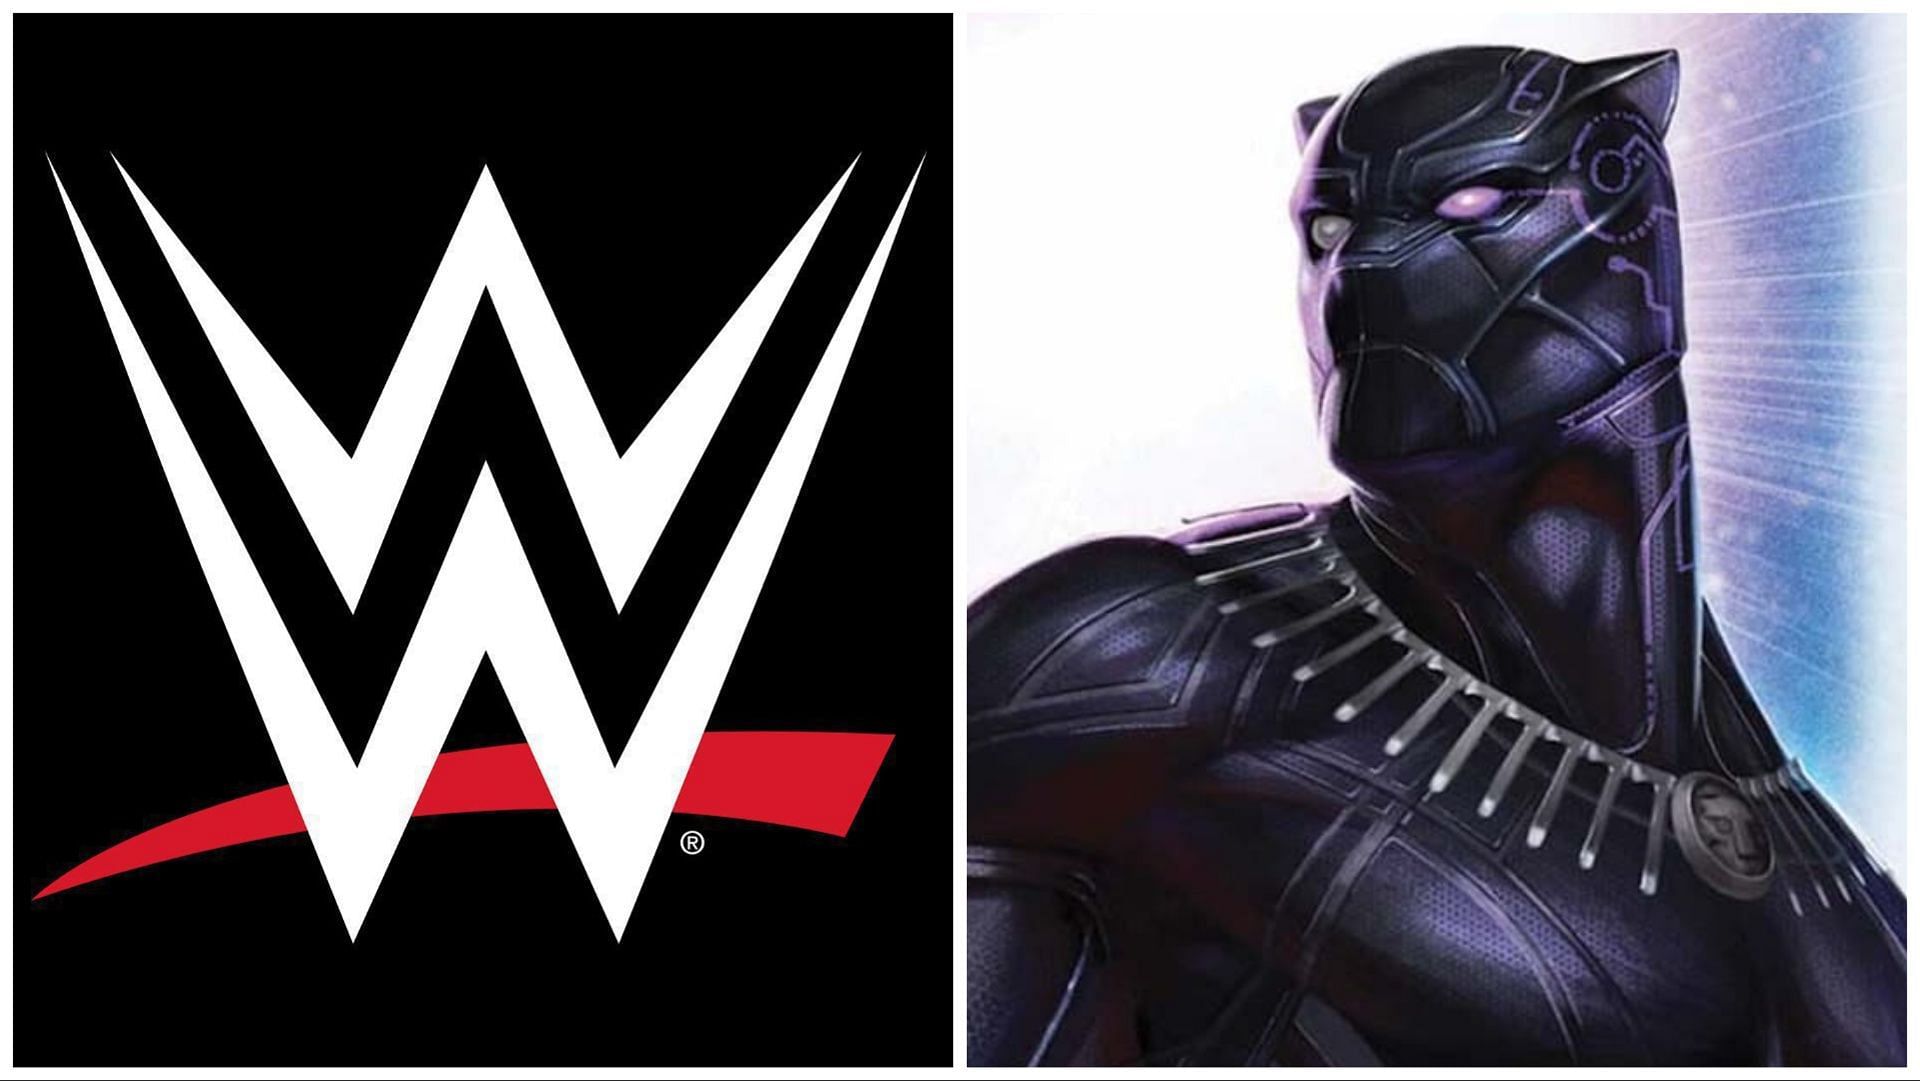 The official WWE logo, Marvel